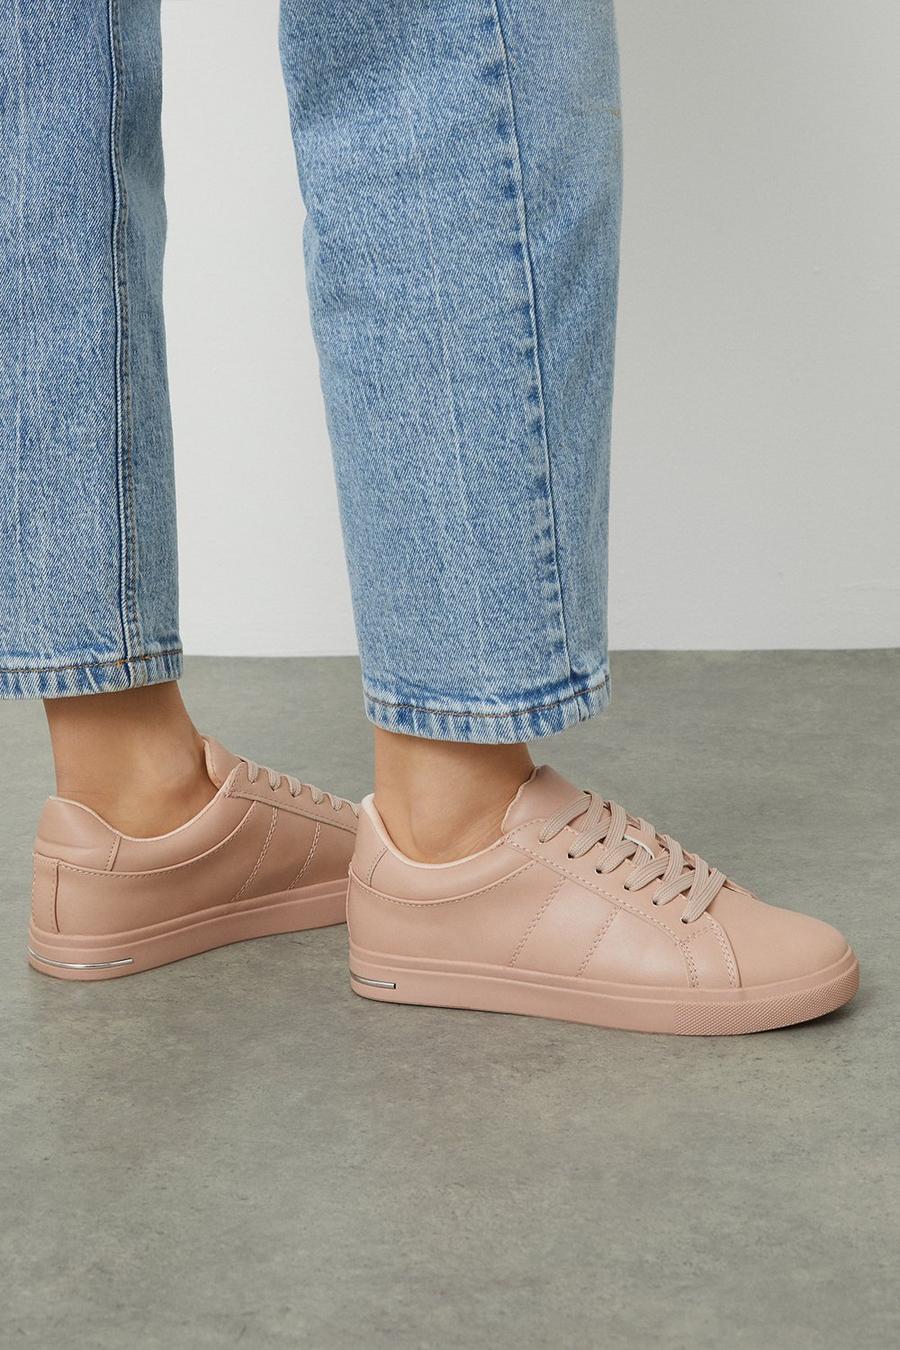 Blush Infinity Lace Up Trainer